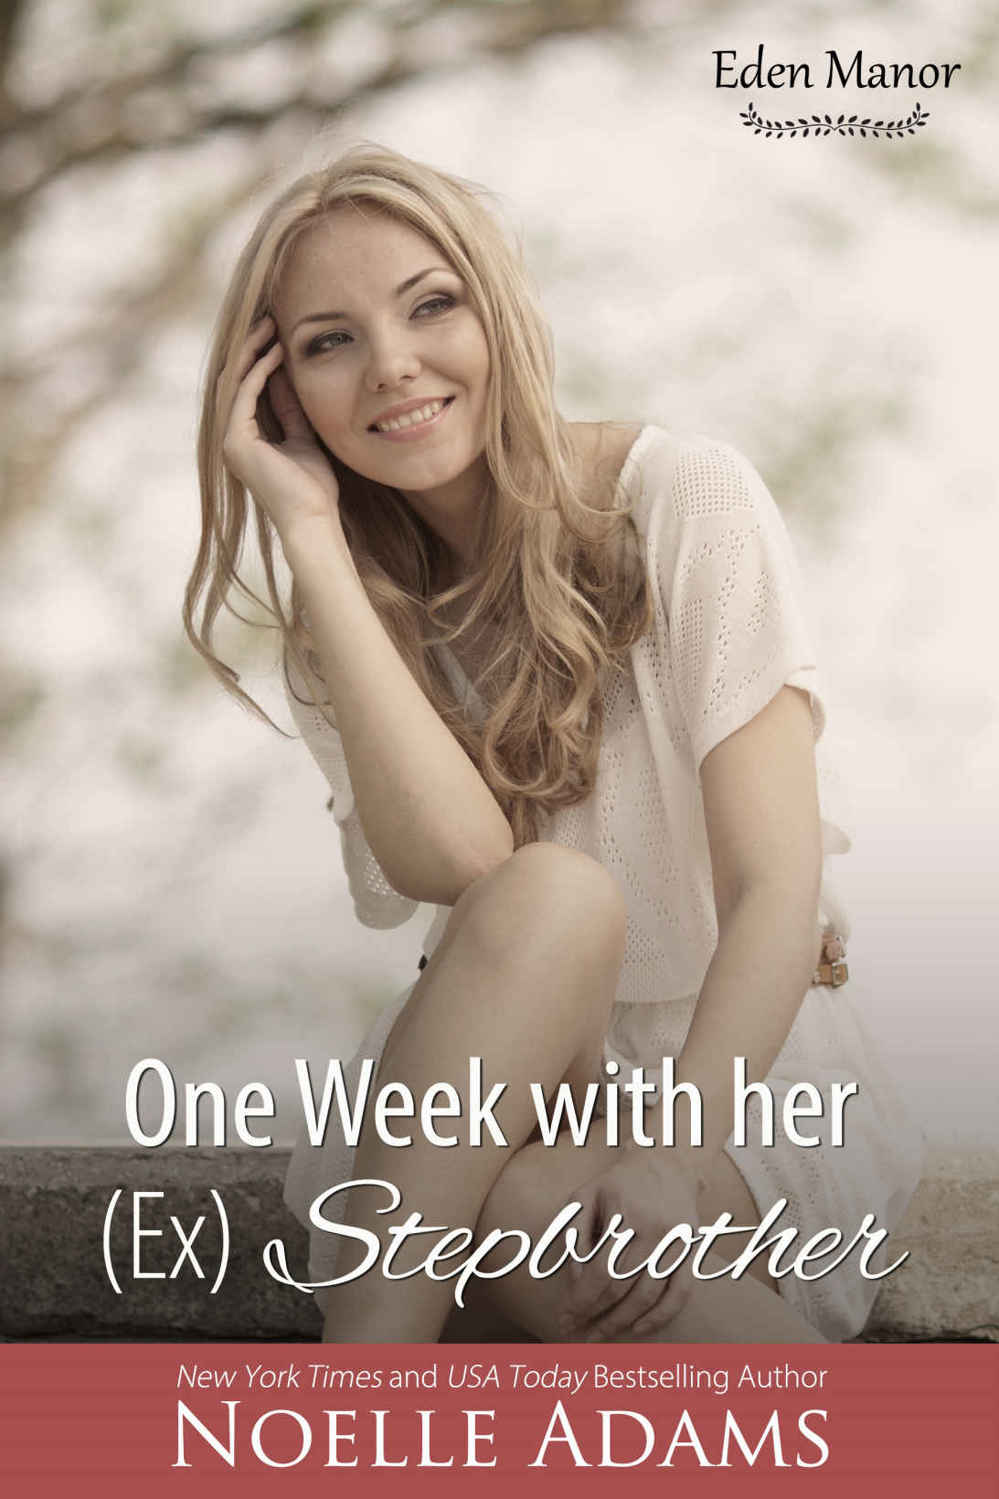 One Week with her (Ex) Stepbrother (Eden Manor #2) by Noelle  Adams